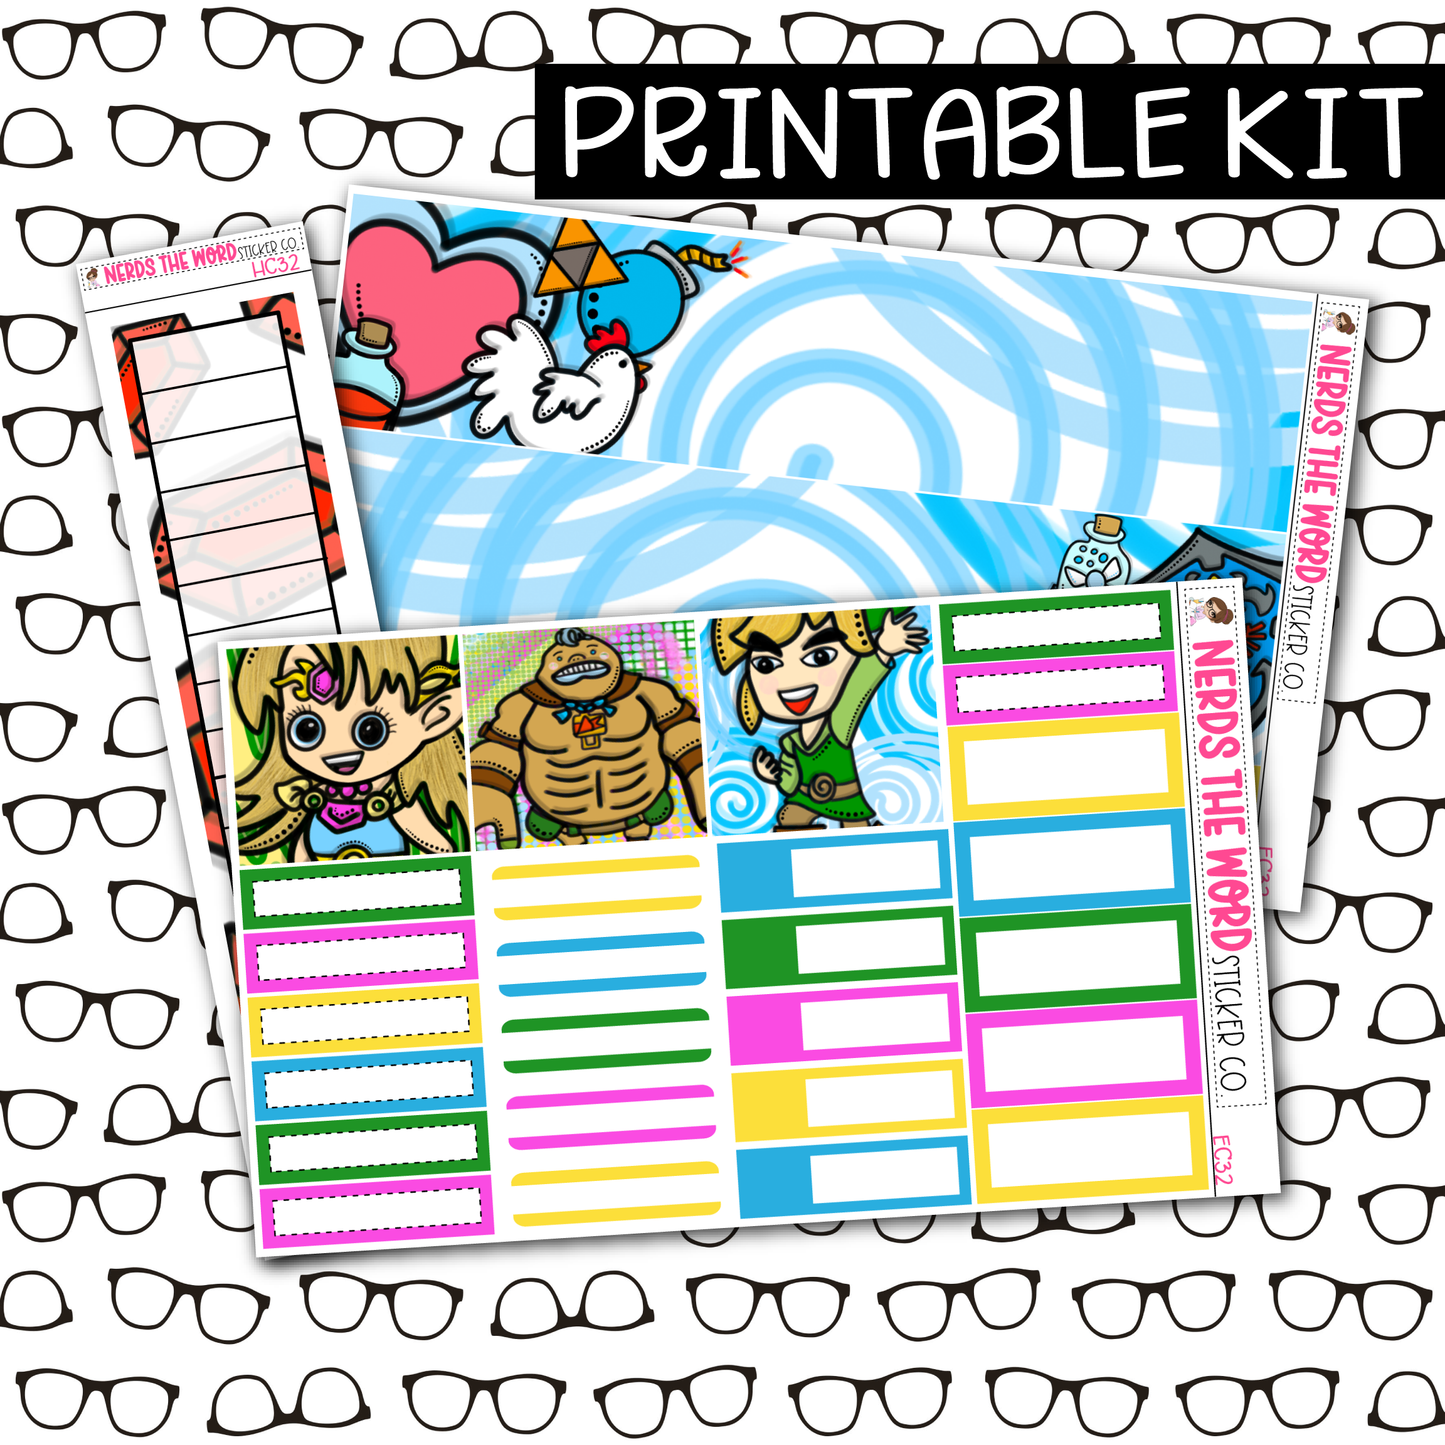 PRINTABLE Link Monthly Kit - Choose your Size